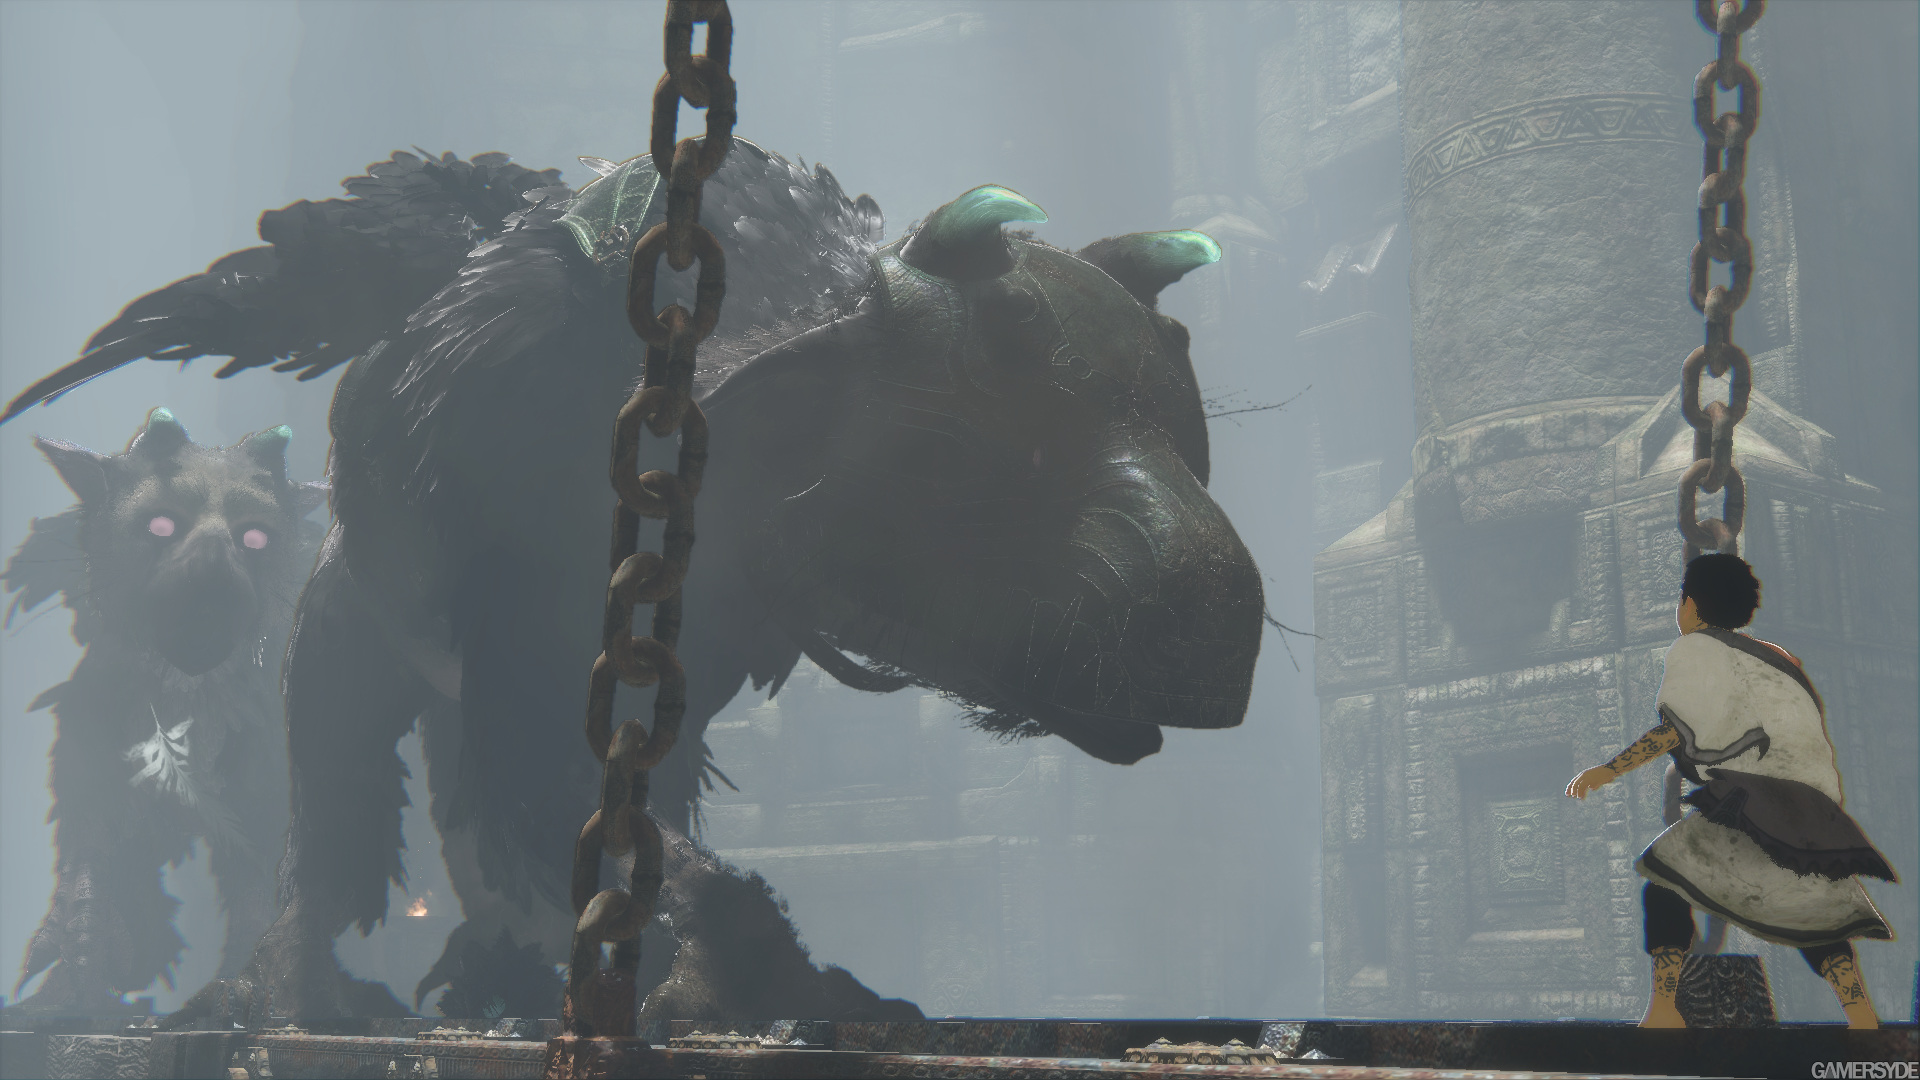 the last guardian gameplay trailer